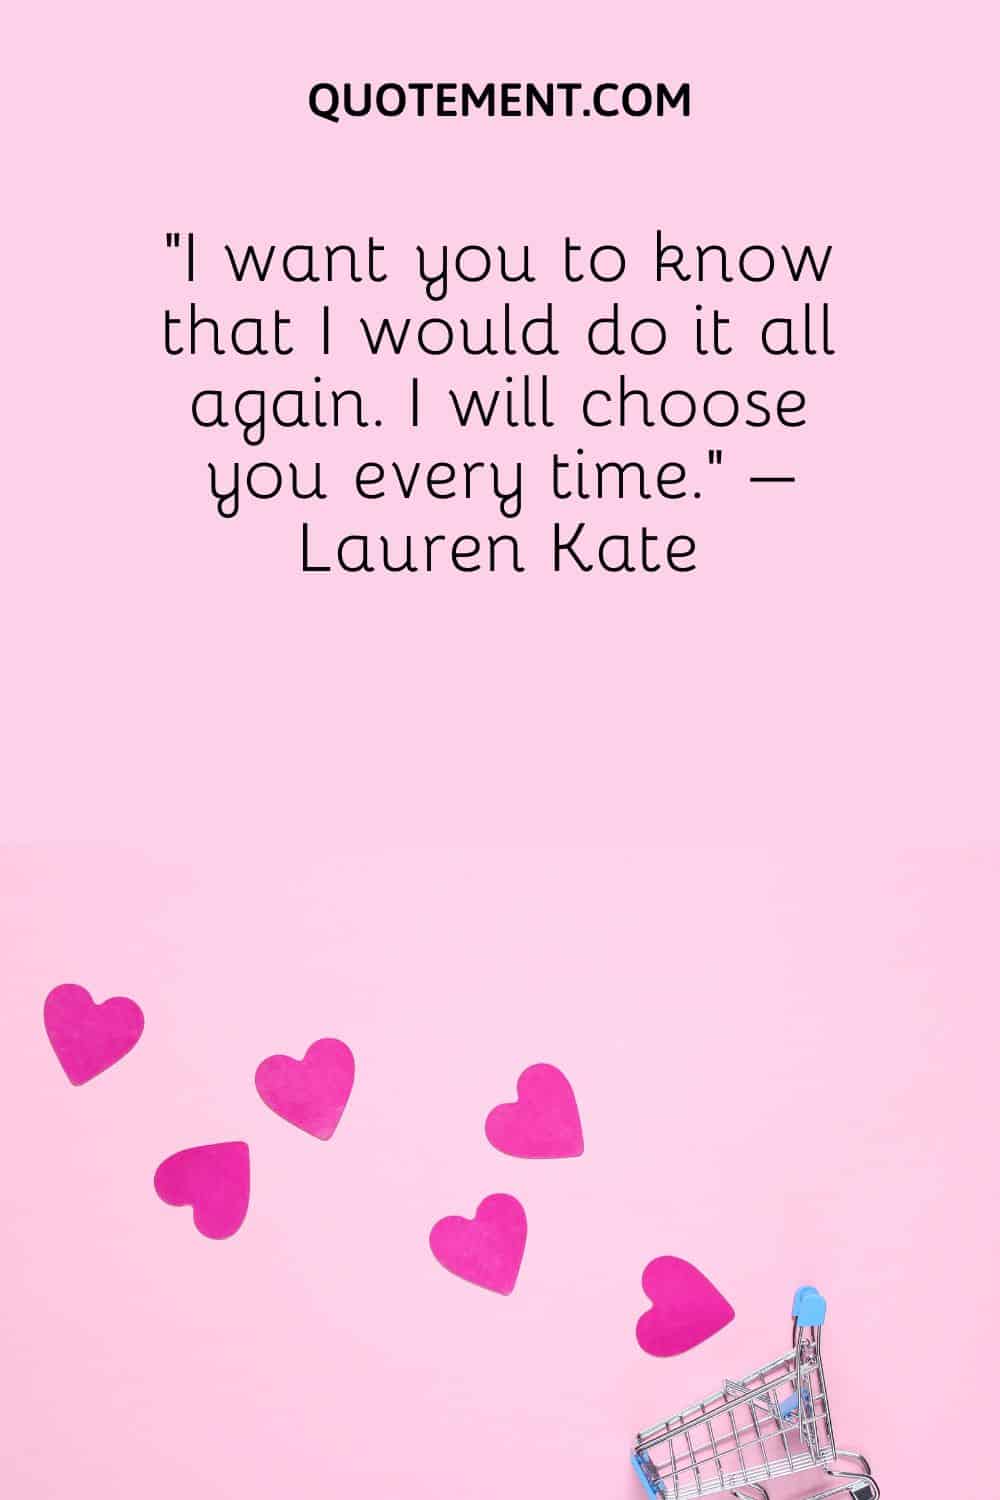 “I want you to know that I would do it all again. I will choose you every time.” – Lauren Kate